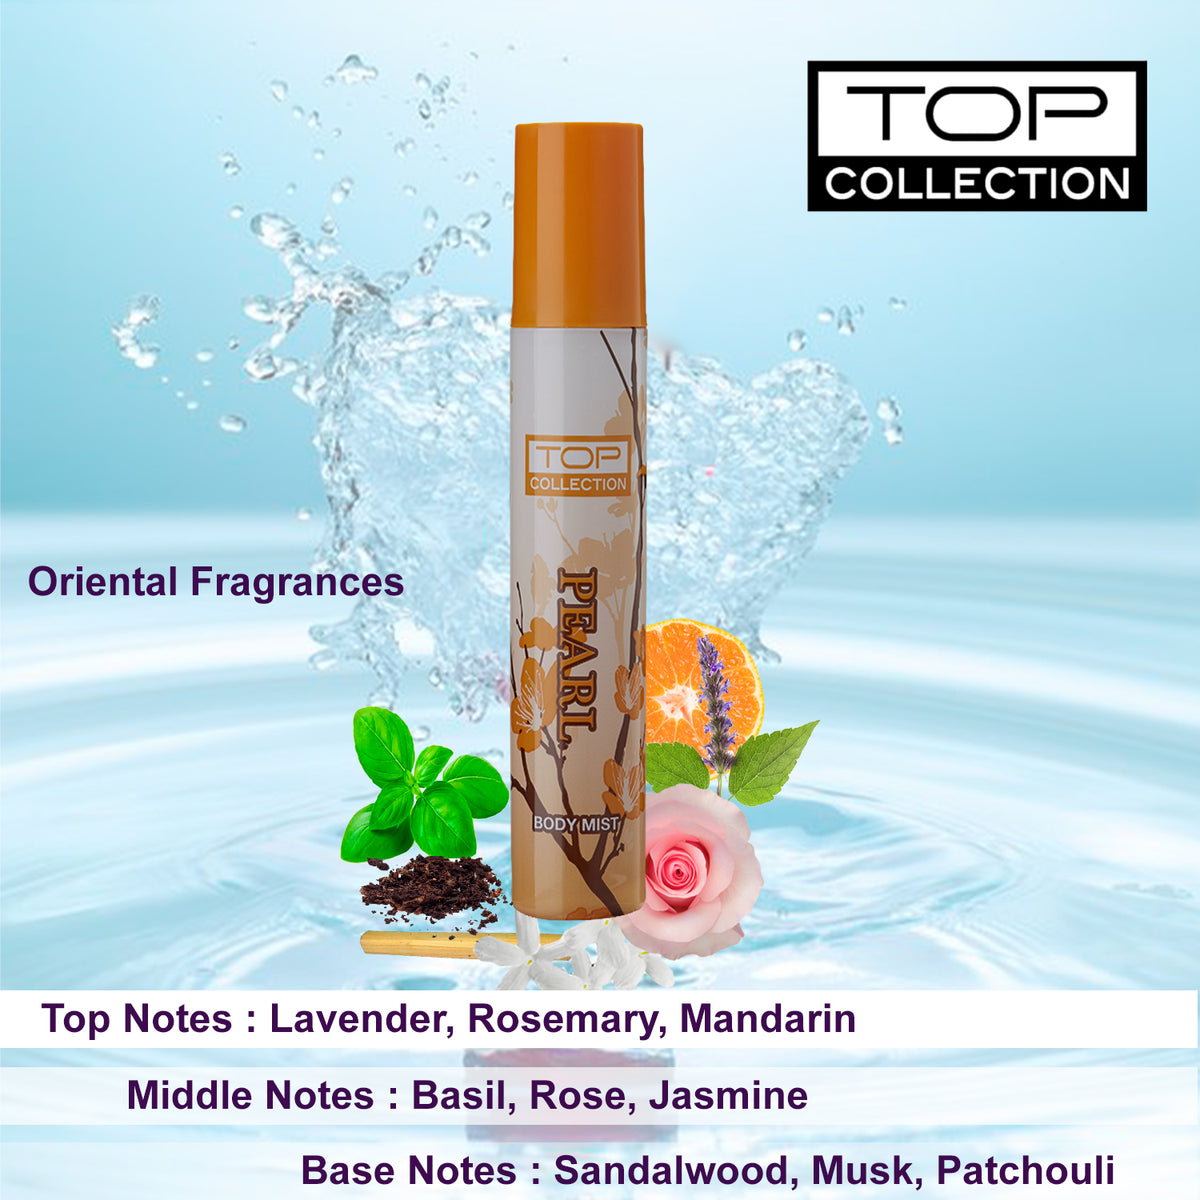 Top Collection Body Mist - Pearl, 75ml